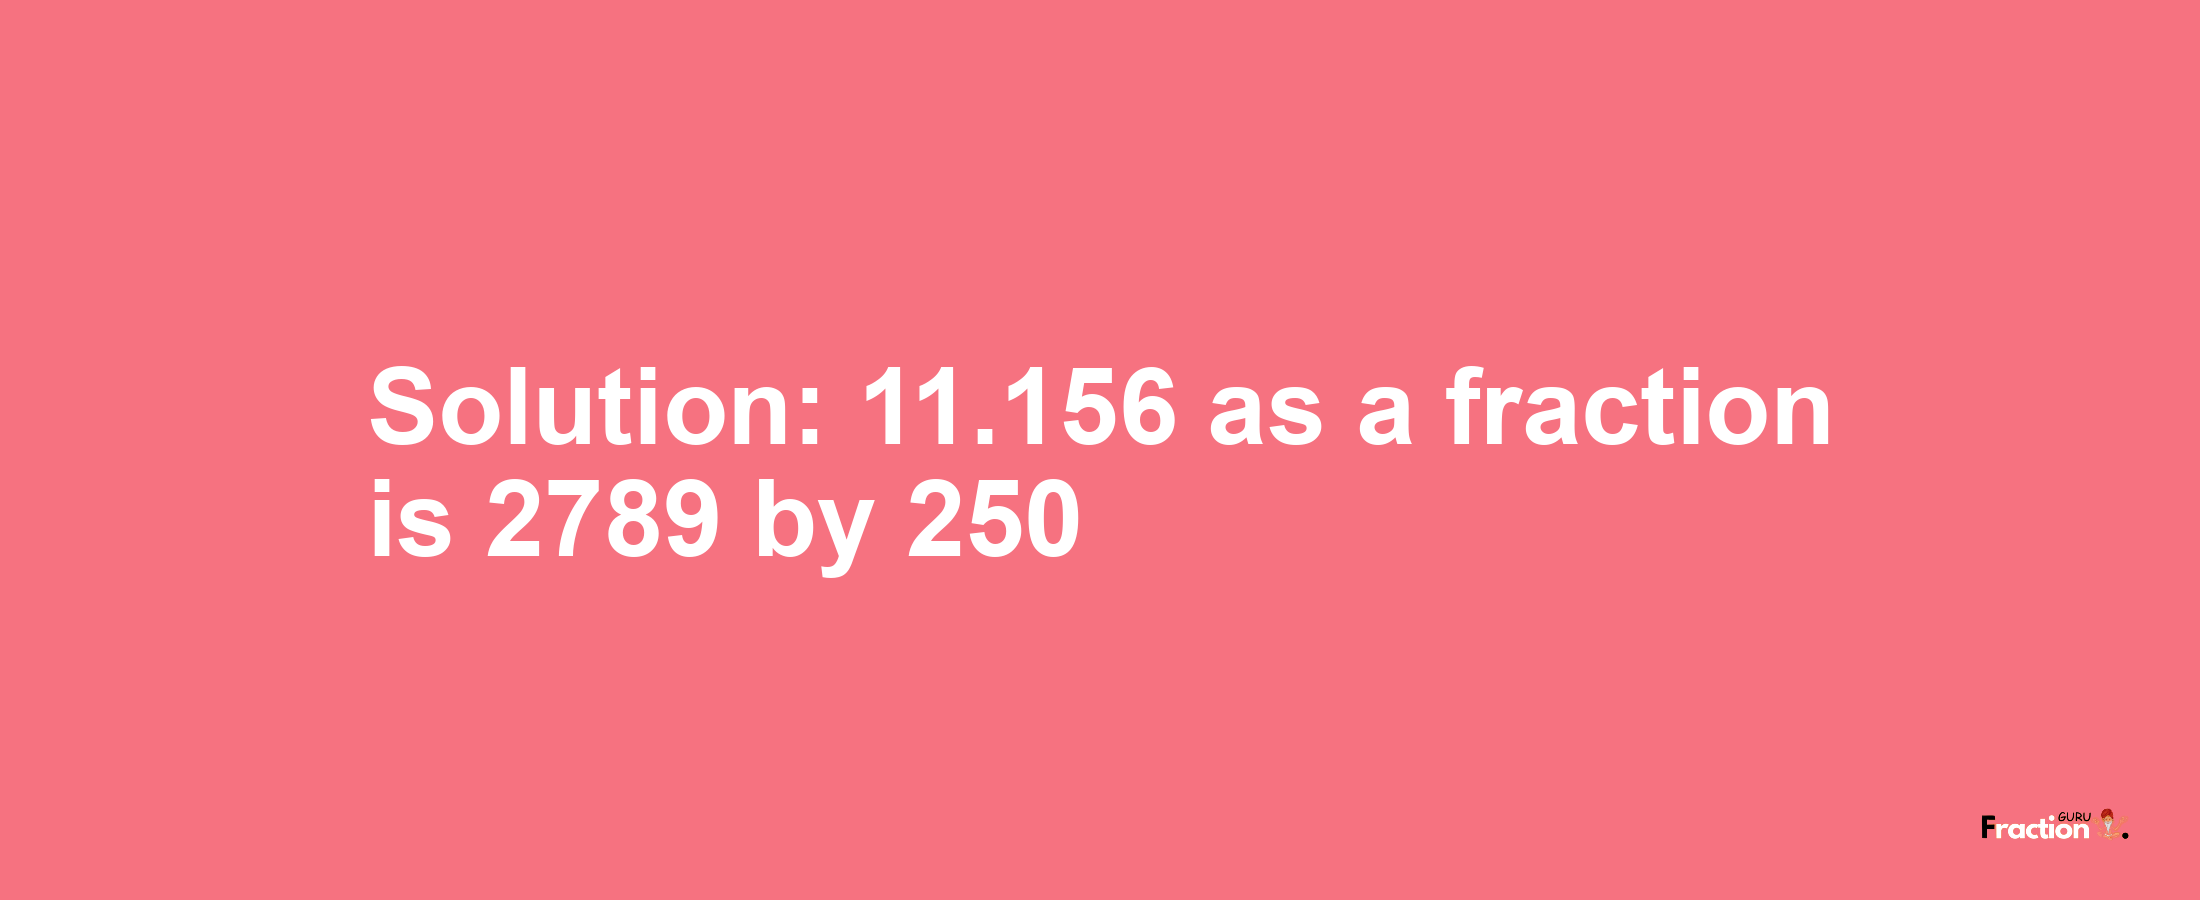 Solution:11.156 as a fraction is 2789/250